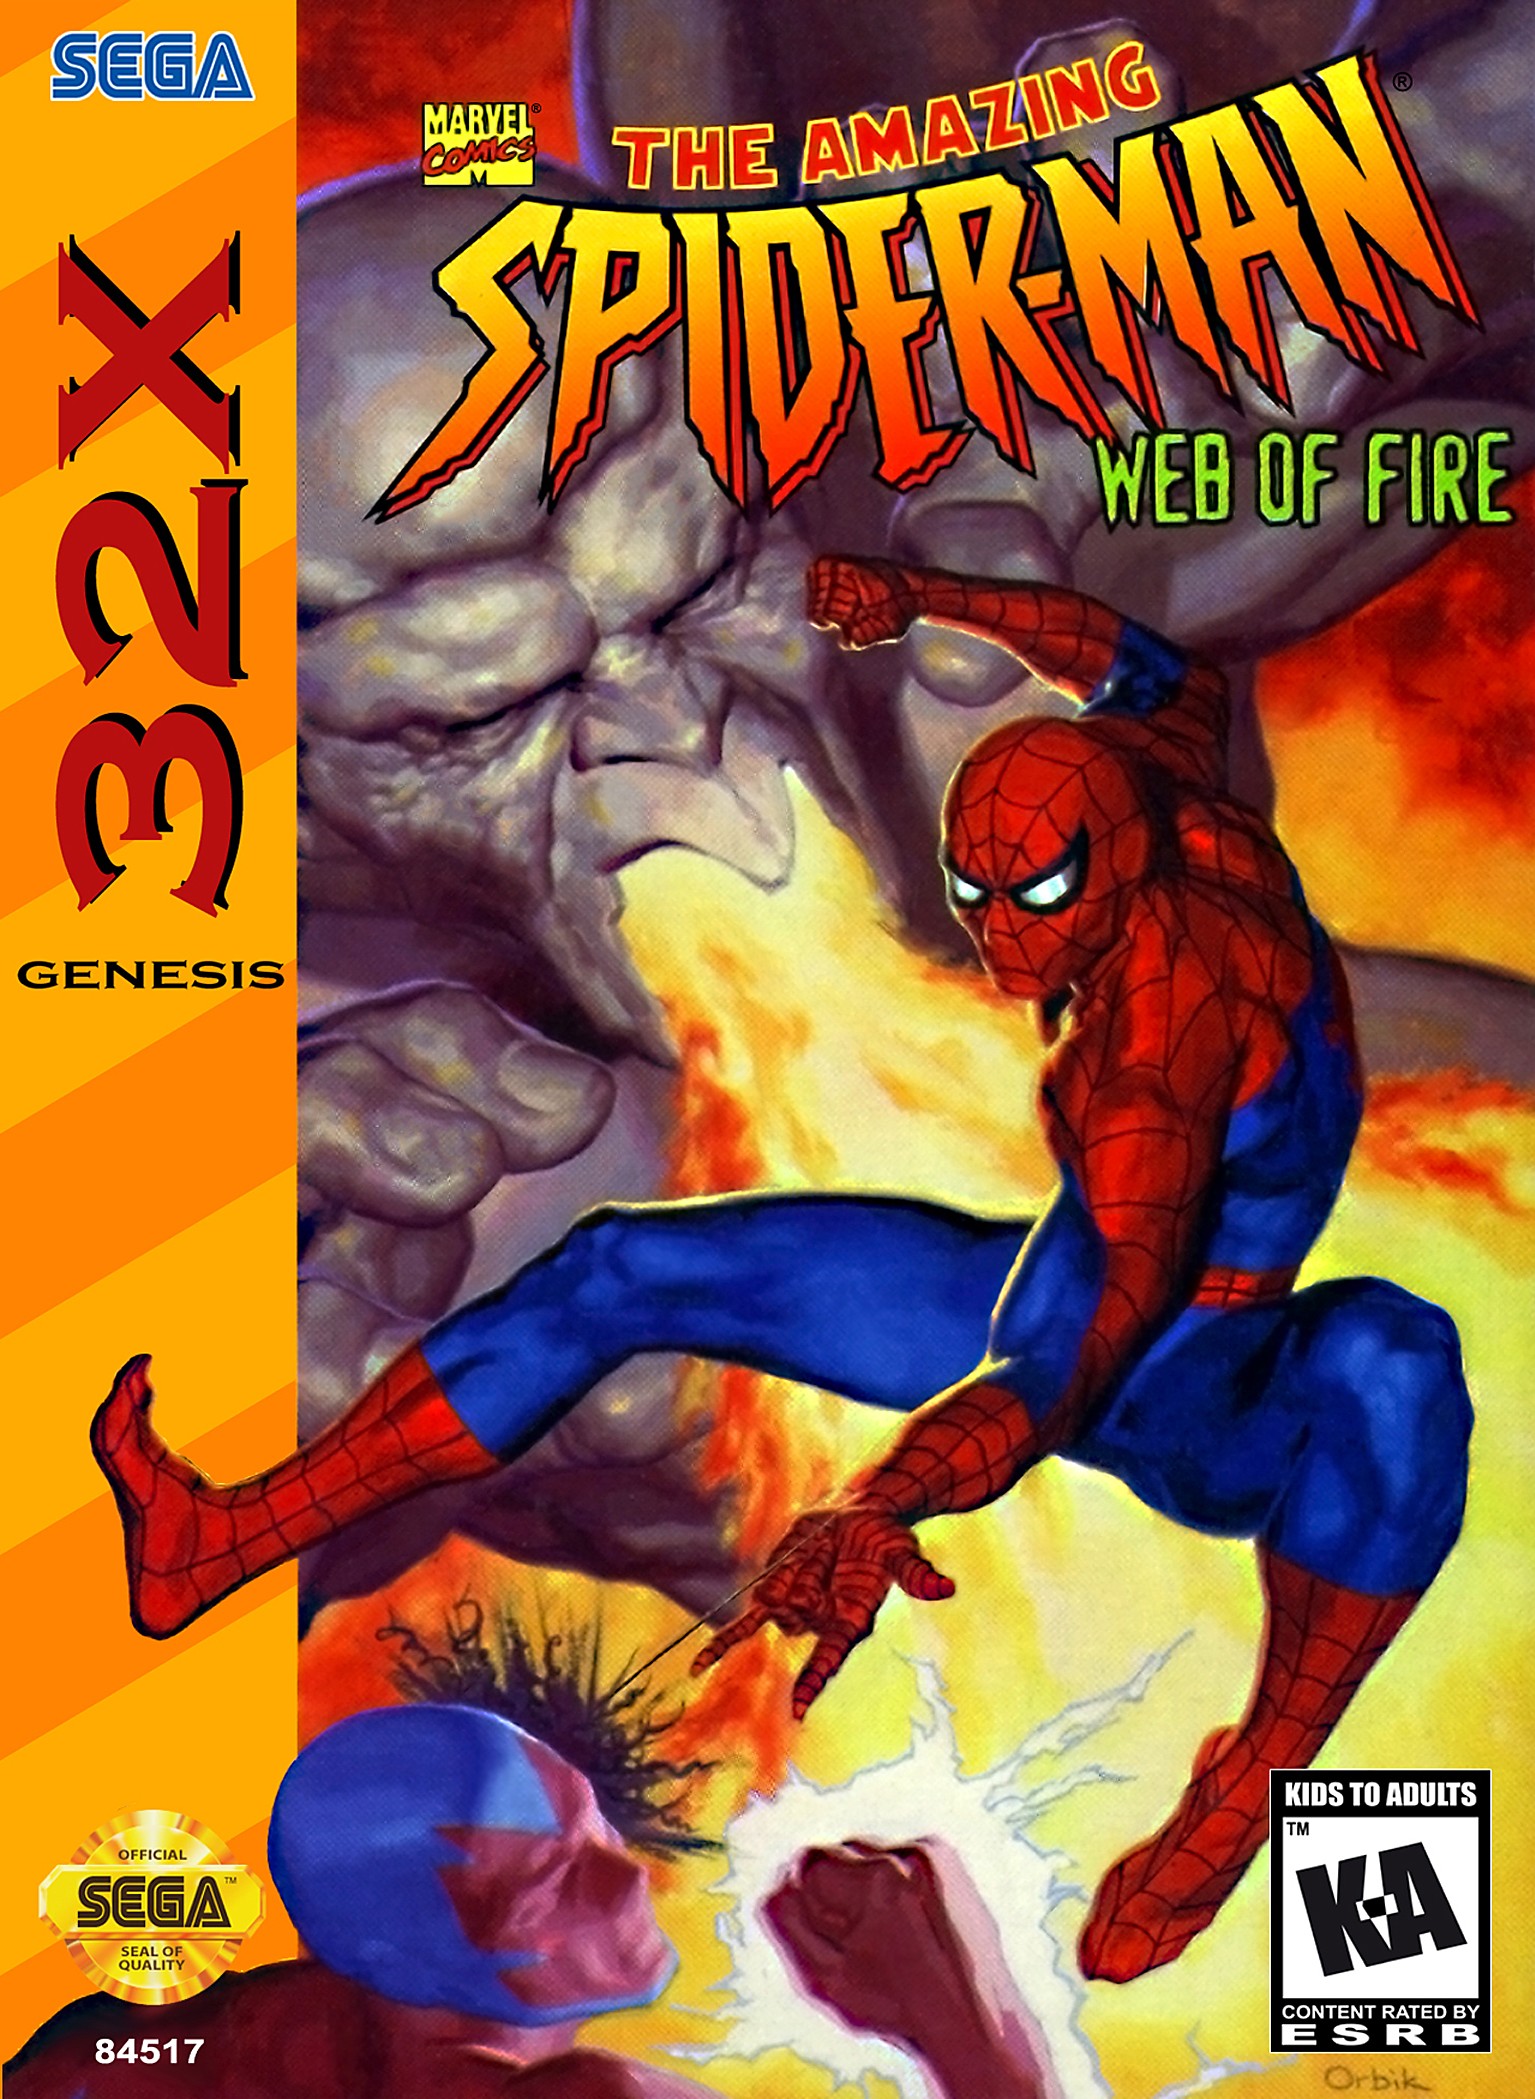 'The Amazing Spider-Man: Web of Fire'